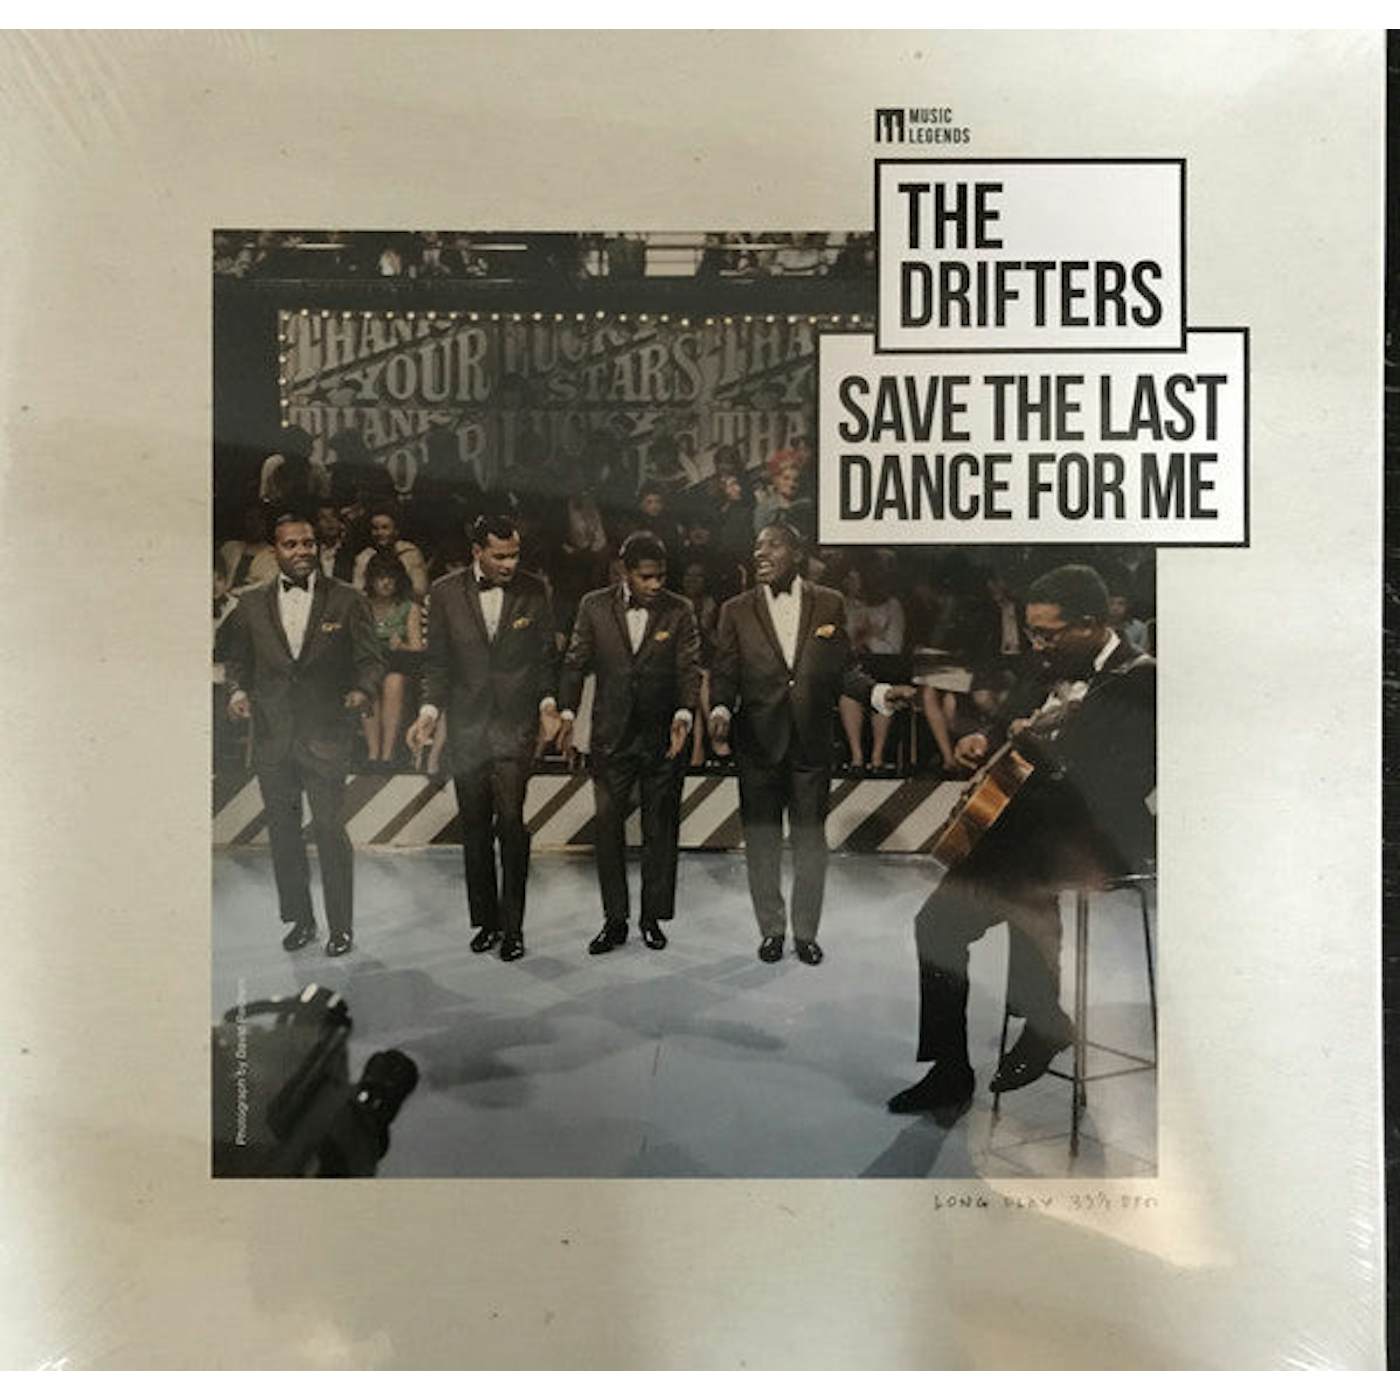 The Drifters / Save The Last Dance For Me - LP (Vinyl)